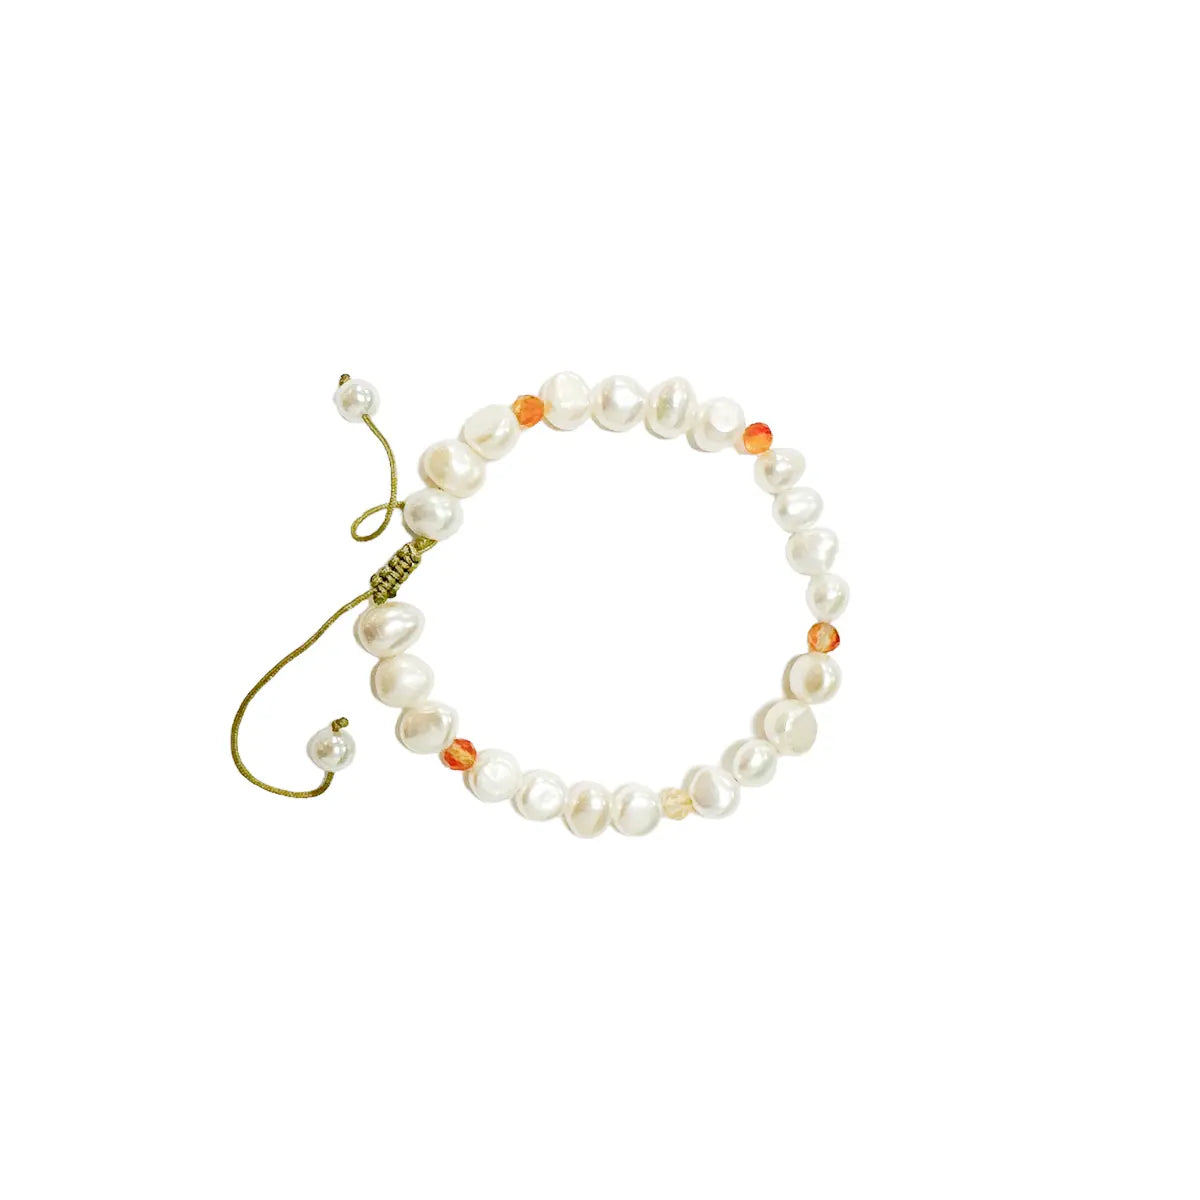 Amber Pearl Armbånd - Forgyldt fra Lush Lush Jewelry